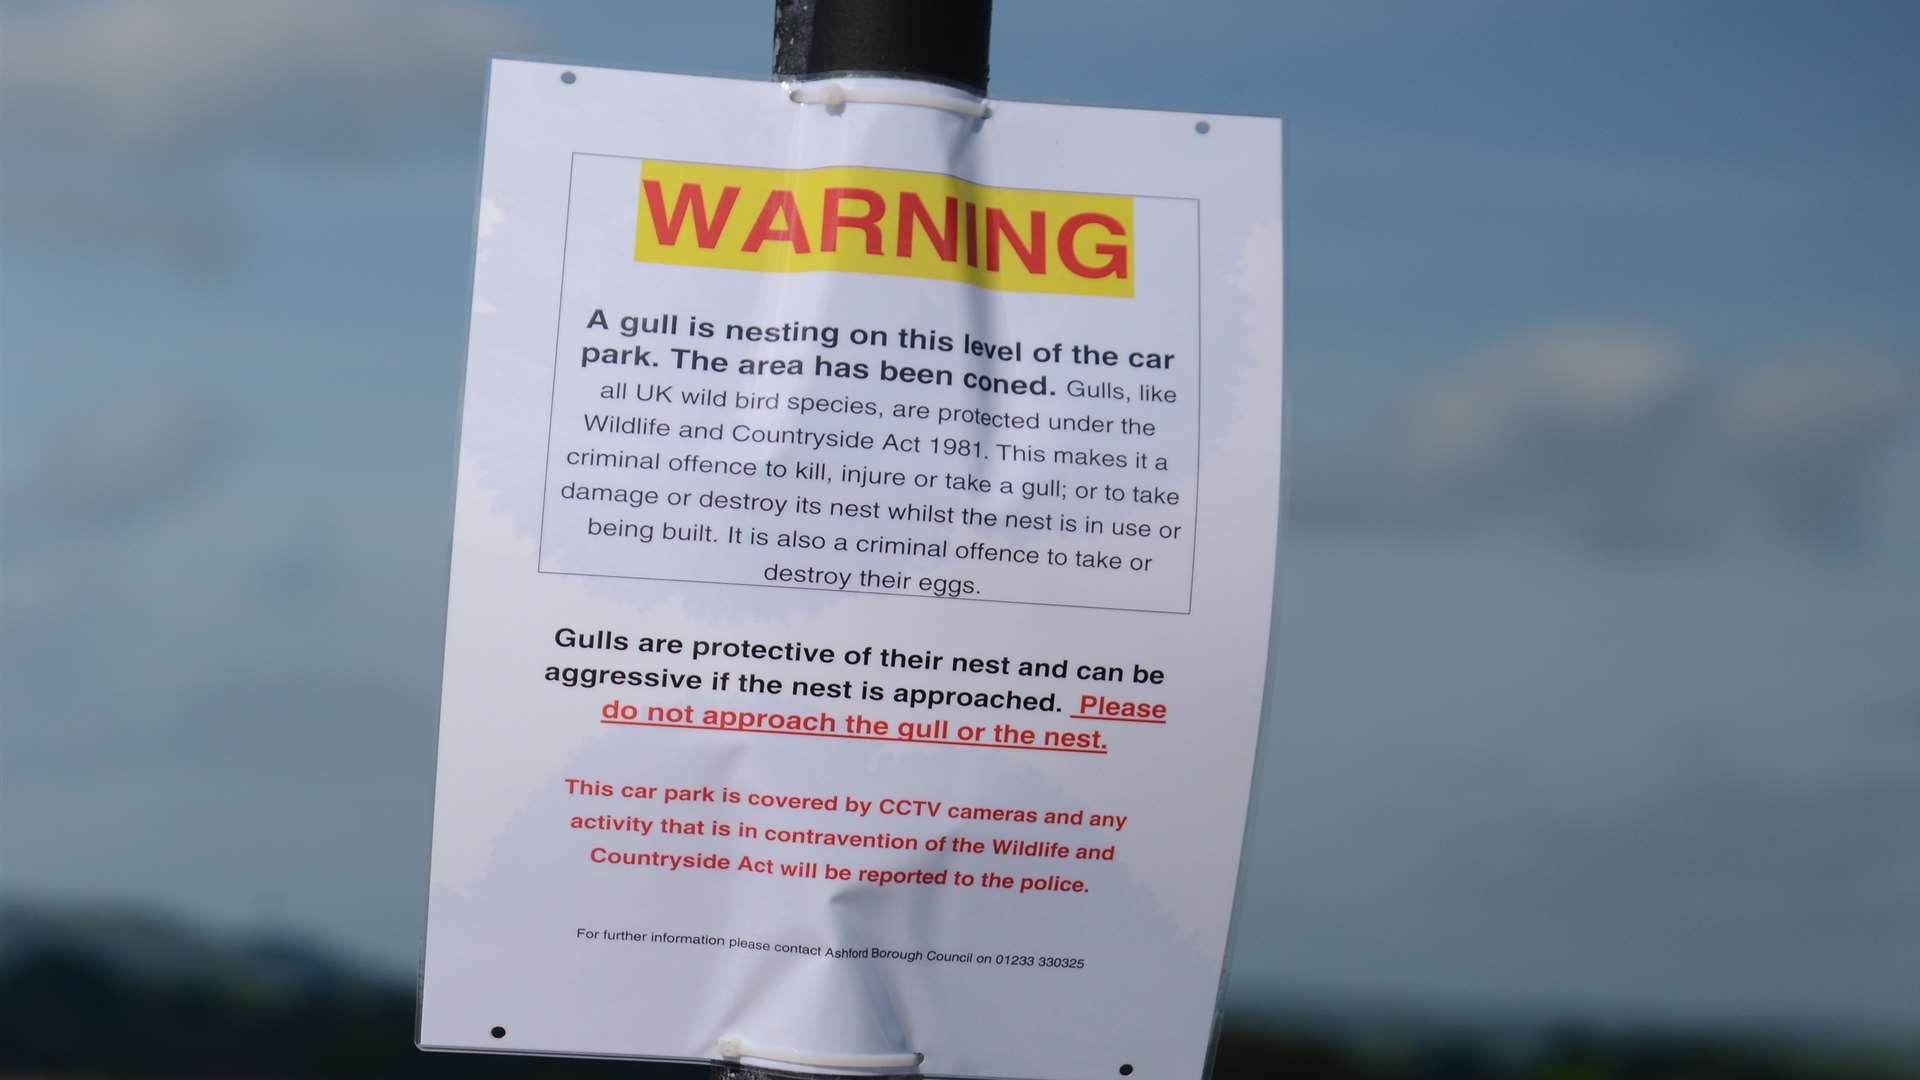 A warning sign has been put up in the car park